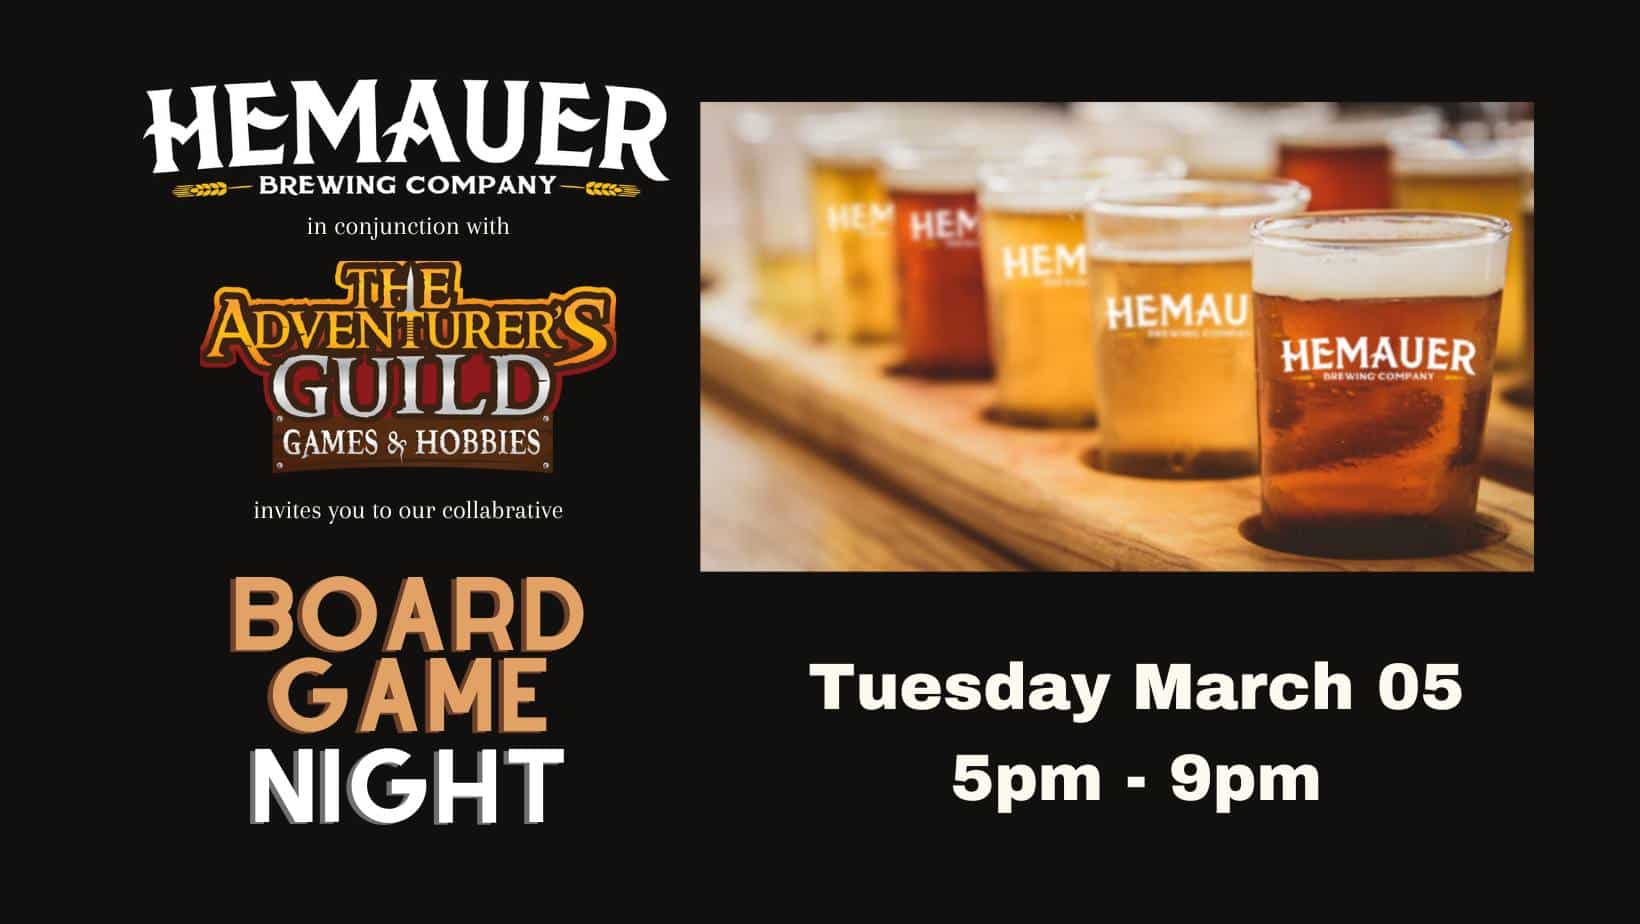 Hemauer Brewing Co., located in Mechanicsburg, PA, is partnering with The Adventurer's Guild to bring you a board game night at Hemauer. Join us on Tuesday, March 5th, from 5 pm until 9 pm for games, pizza and drinks. The Adventurer's Guild will bring a stack of board games to play, but feel free to bring your own!